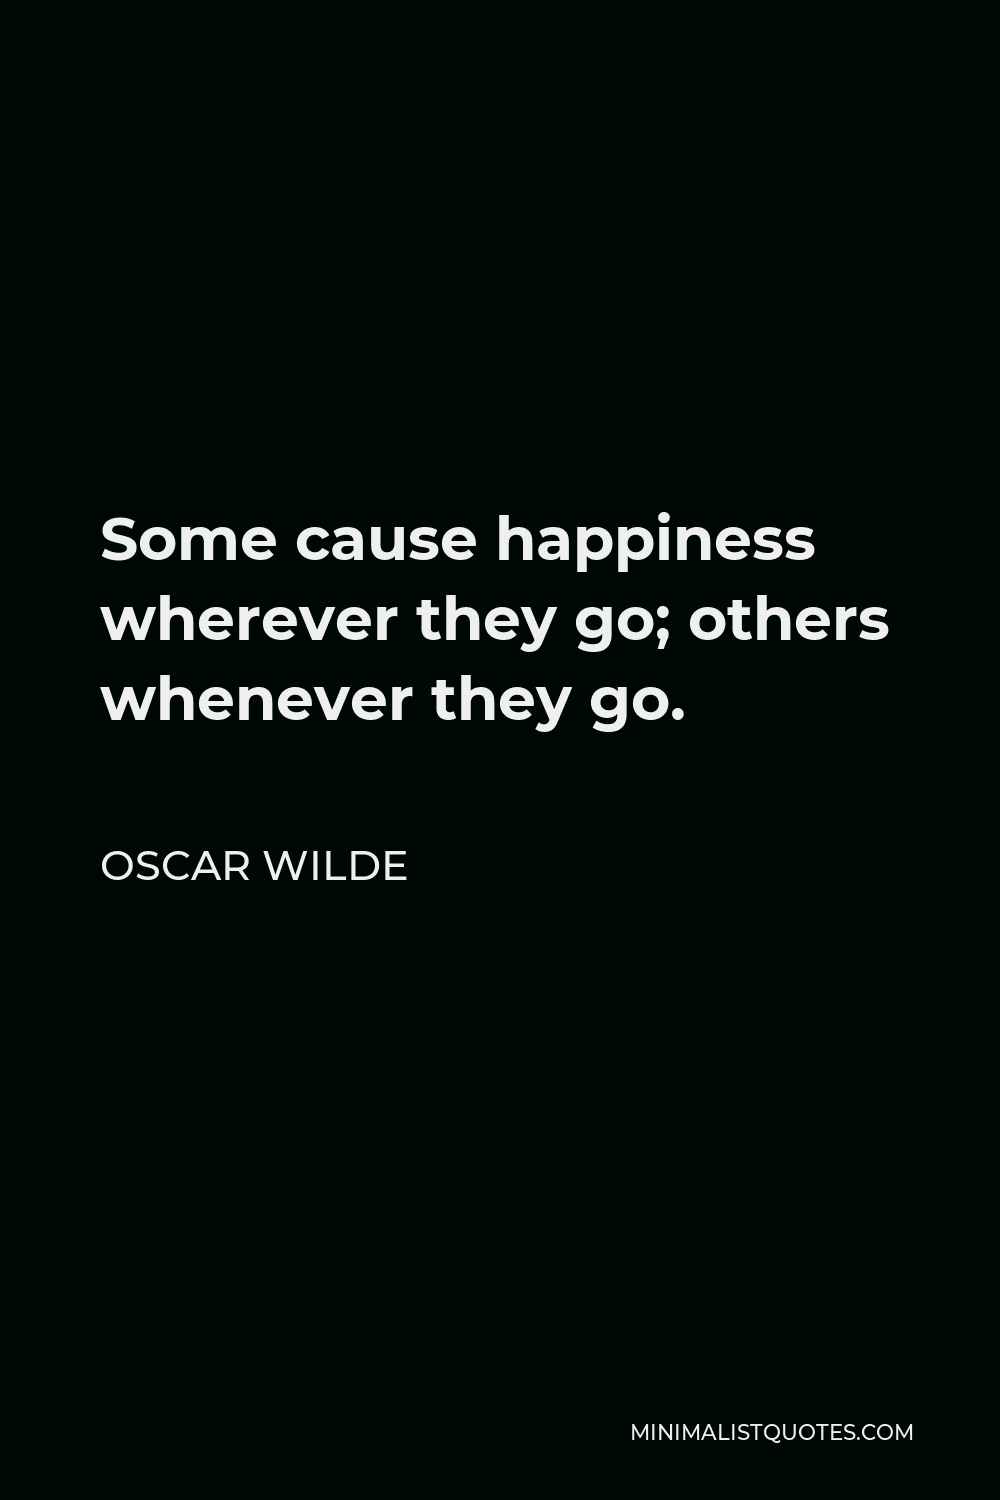 Oscar Wilde Quote: Some cause happiness wherever they go; others ...